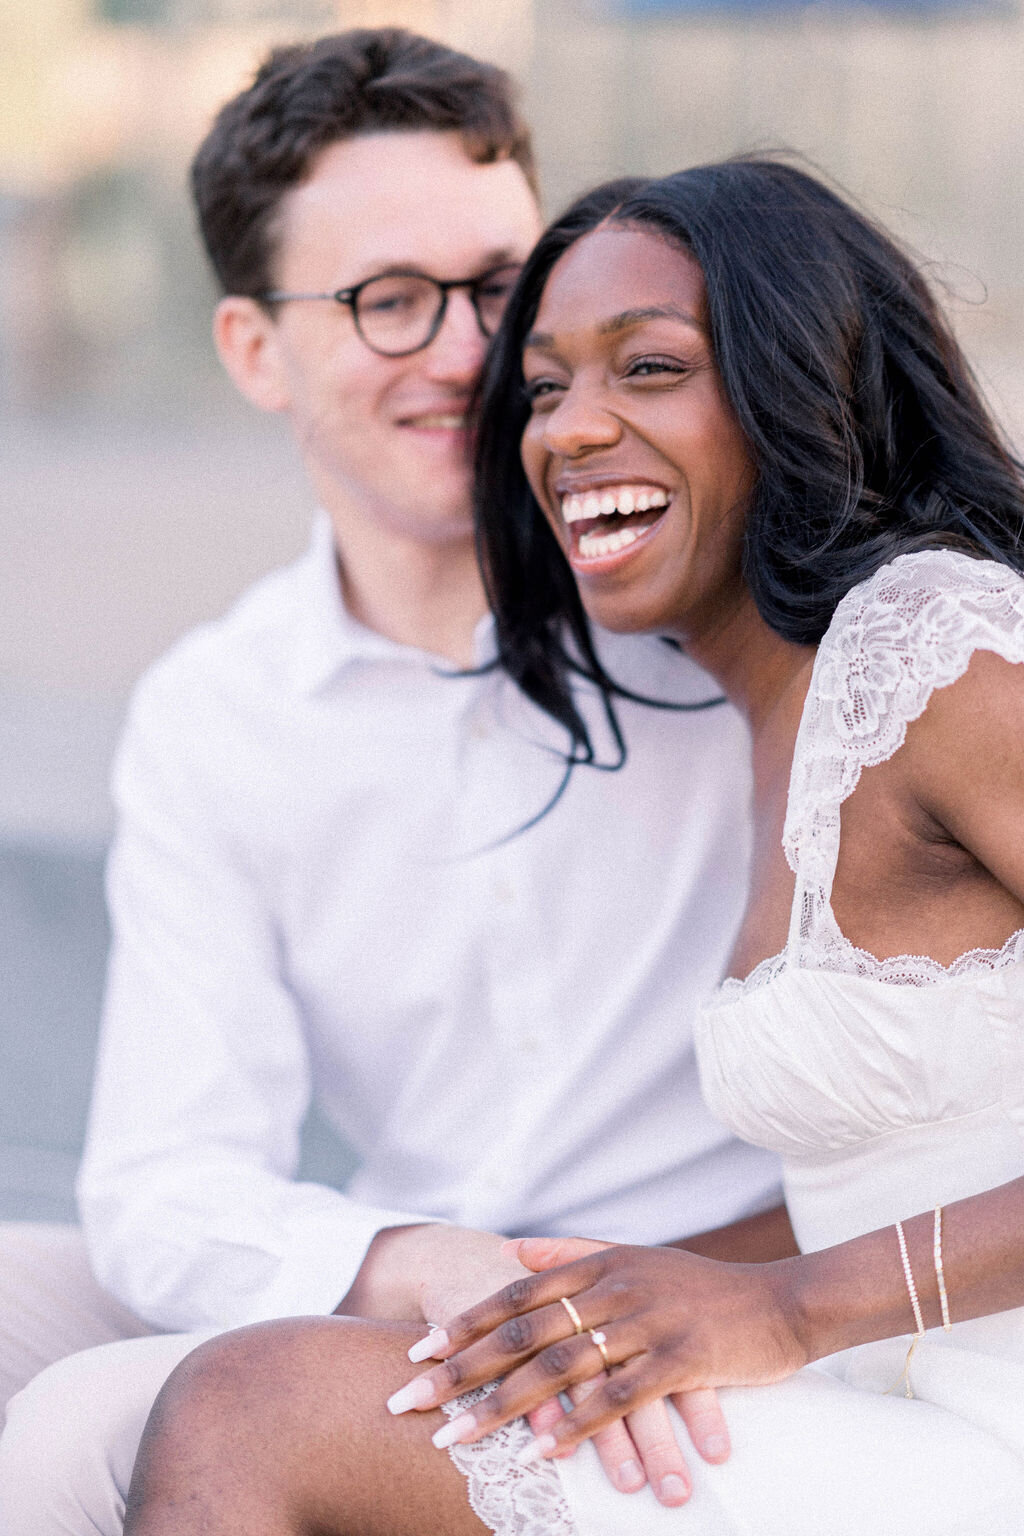 AllThingsJoyPhotography_TomMichelle_Engagement_HIGHRES-161